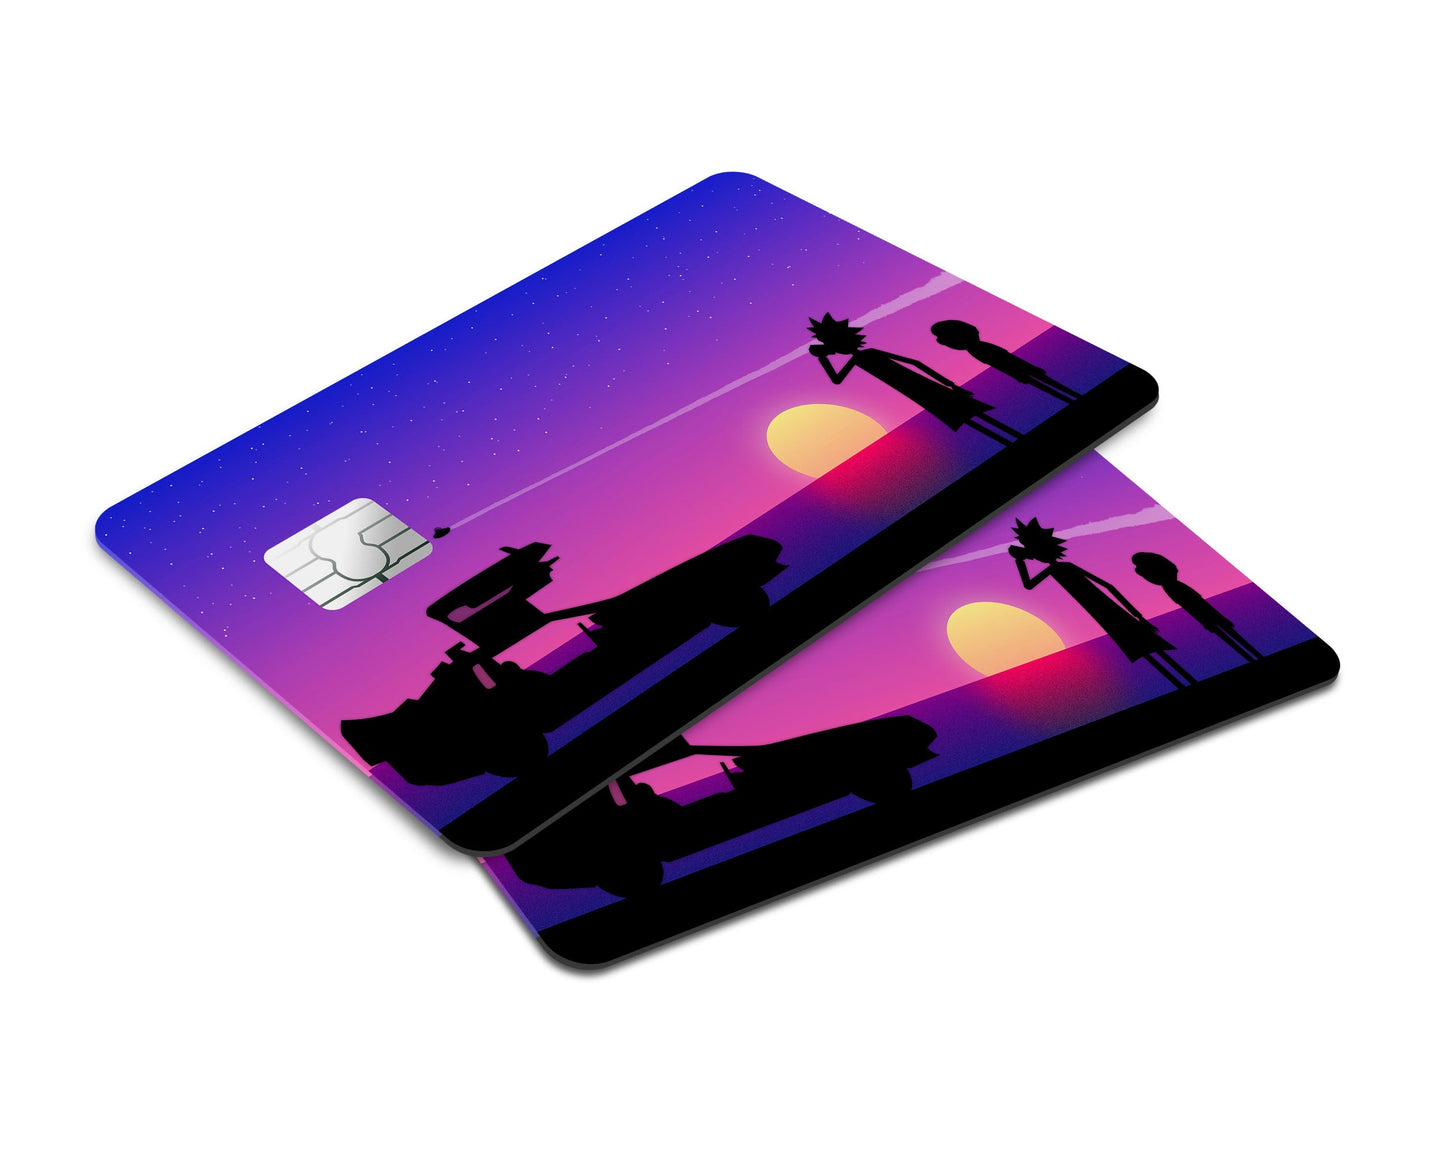 Anime Town Creations Credit Card Rick and Morty Back to Time Travel Window Skins - Anime Rick and Morty Credit Card Skin